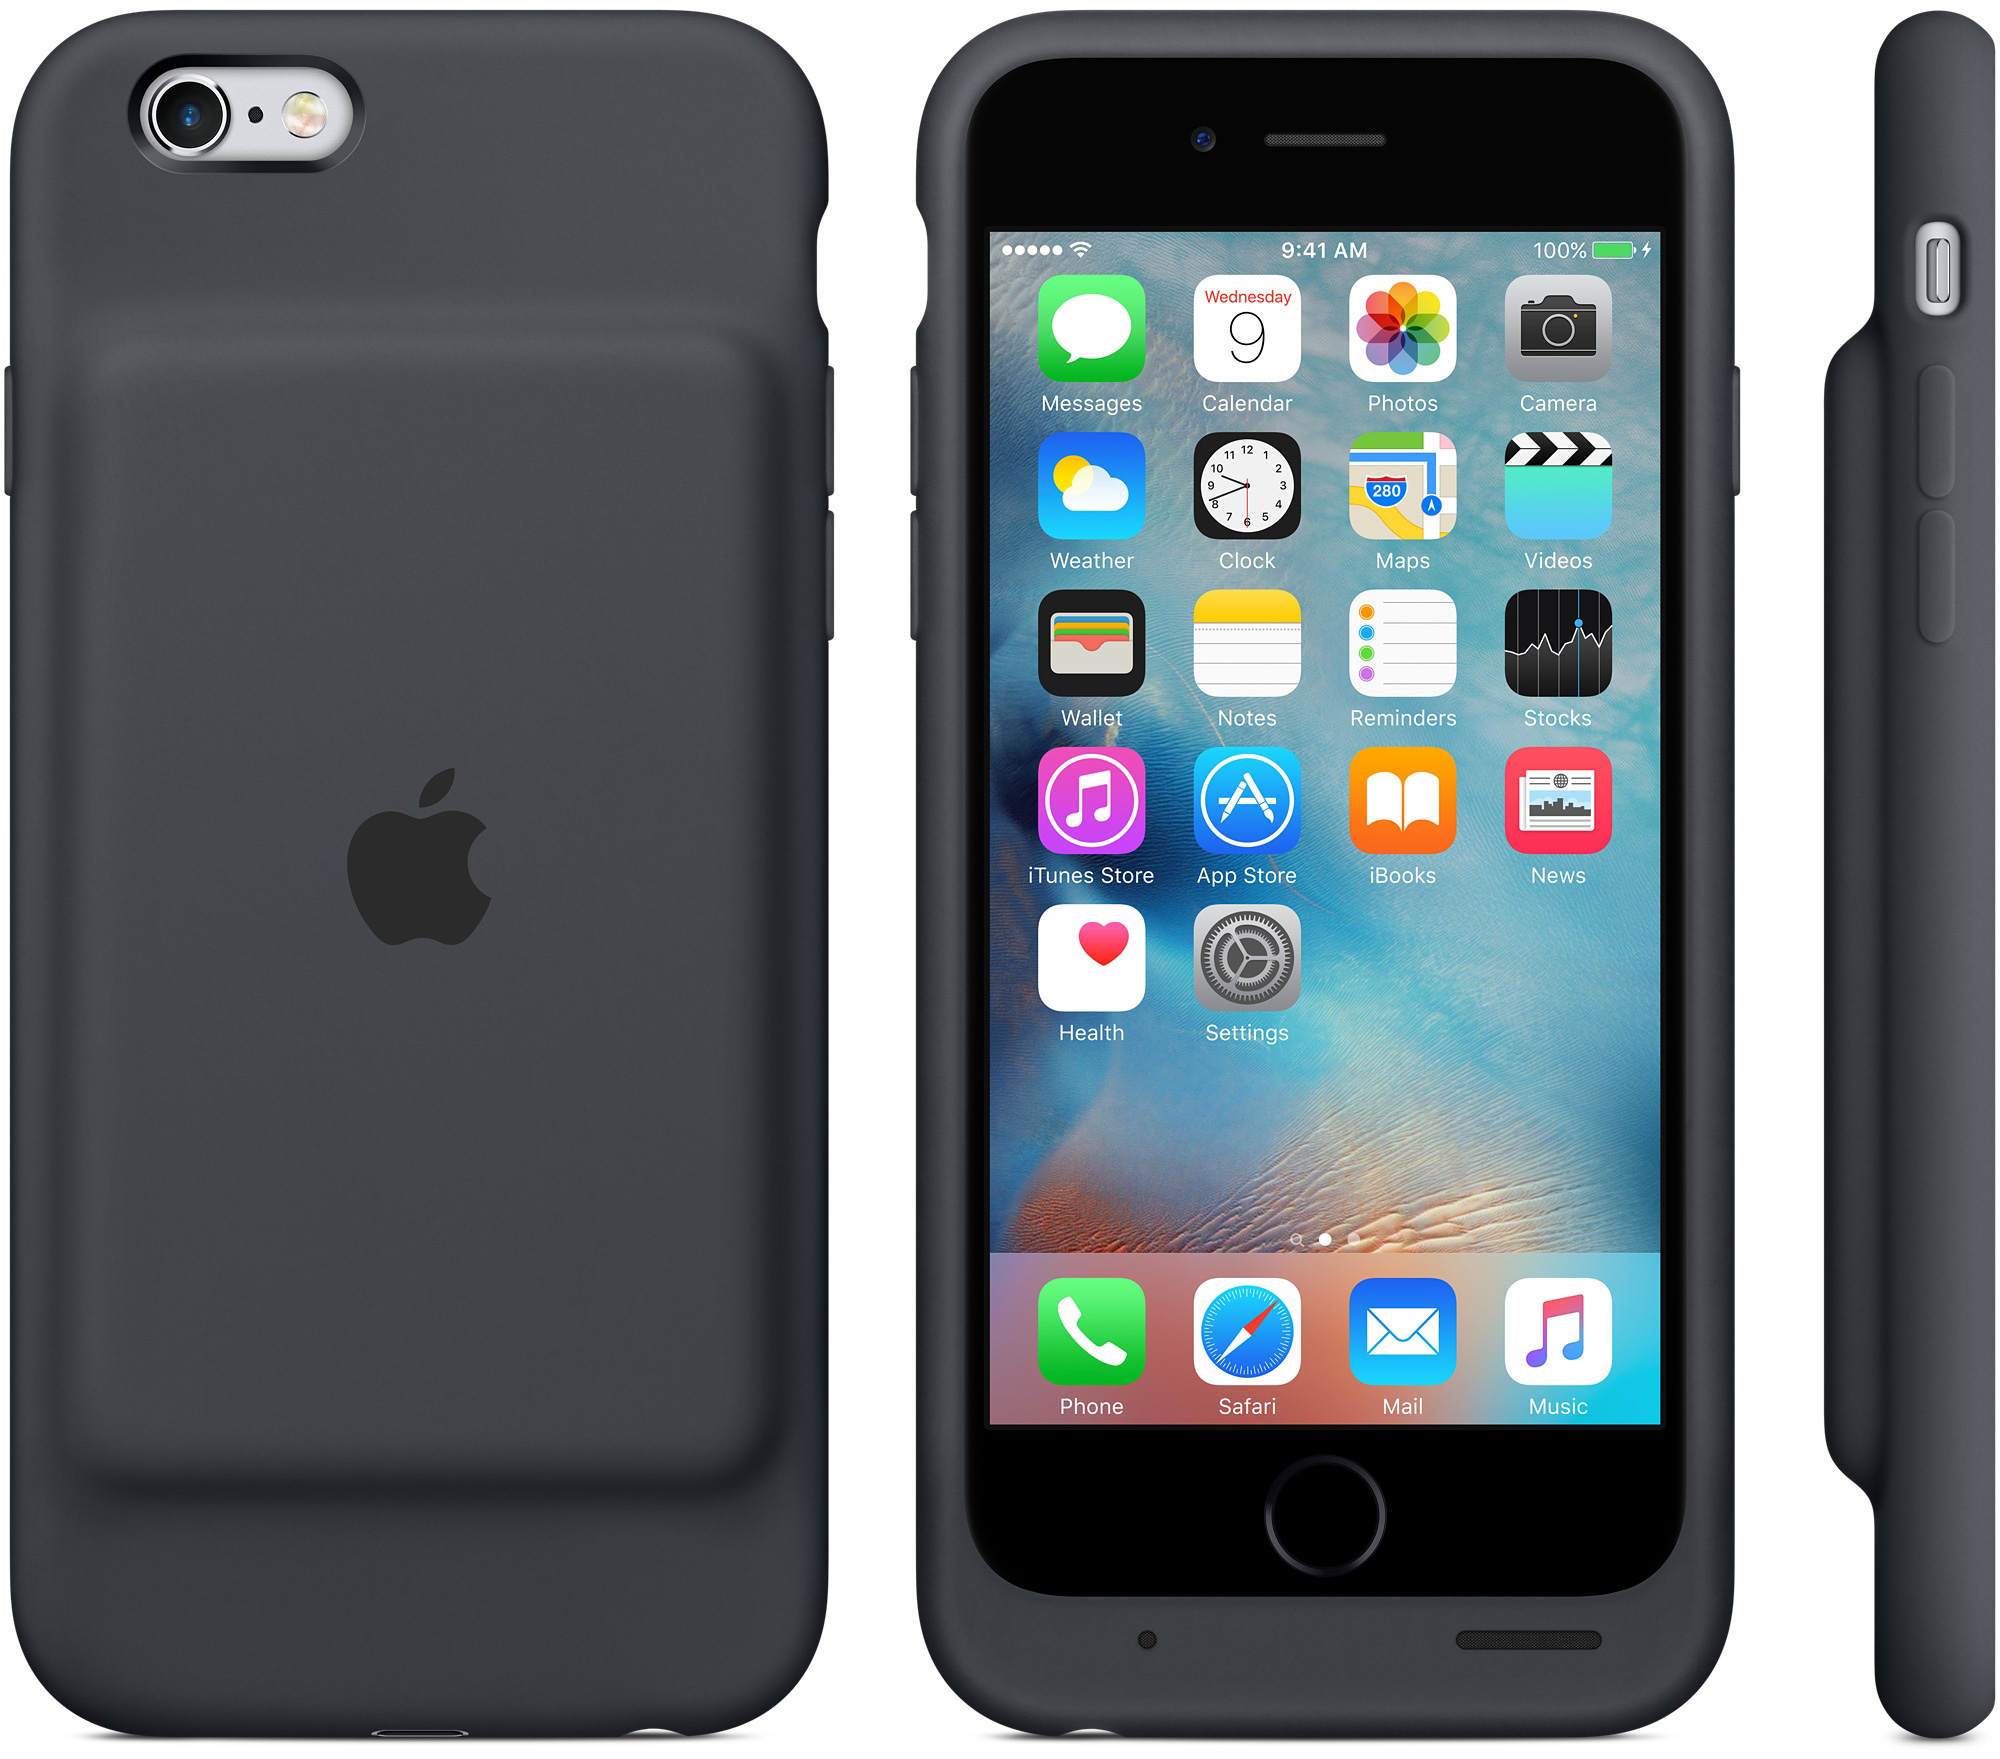 Why Apple's new battery case is smarter than the others